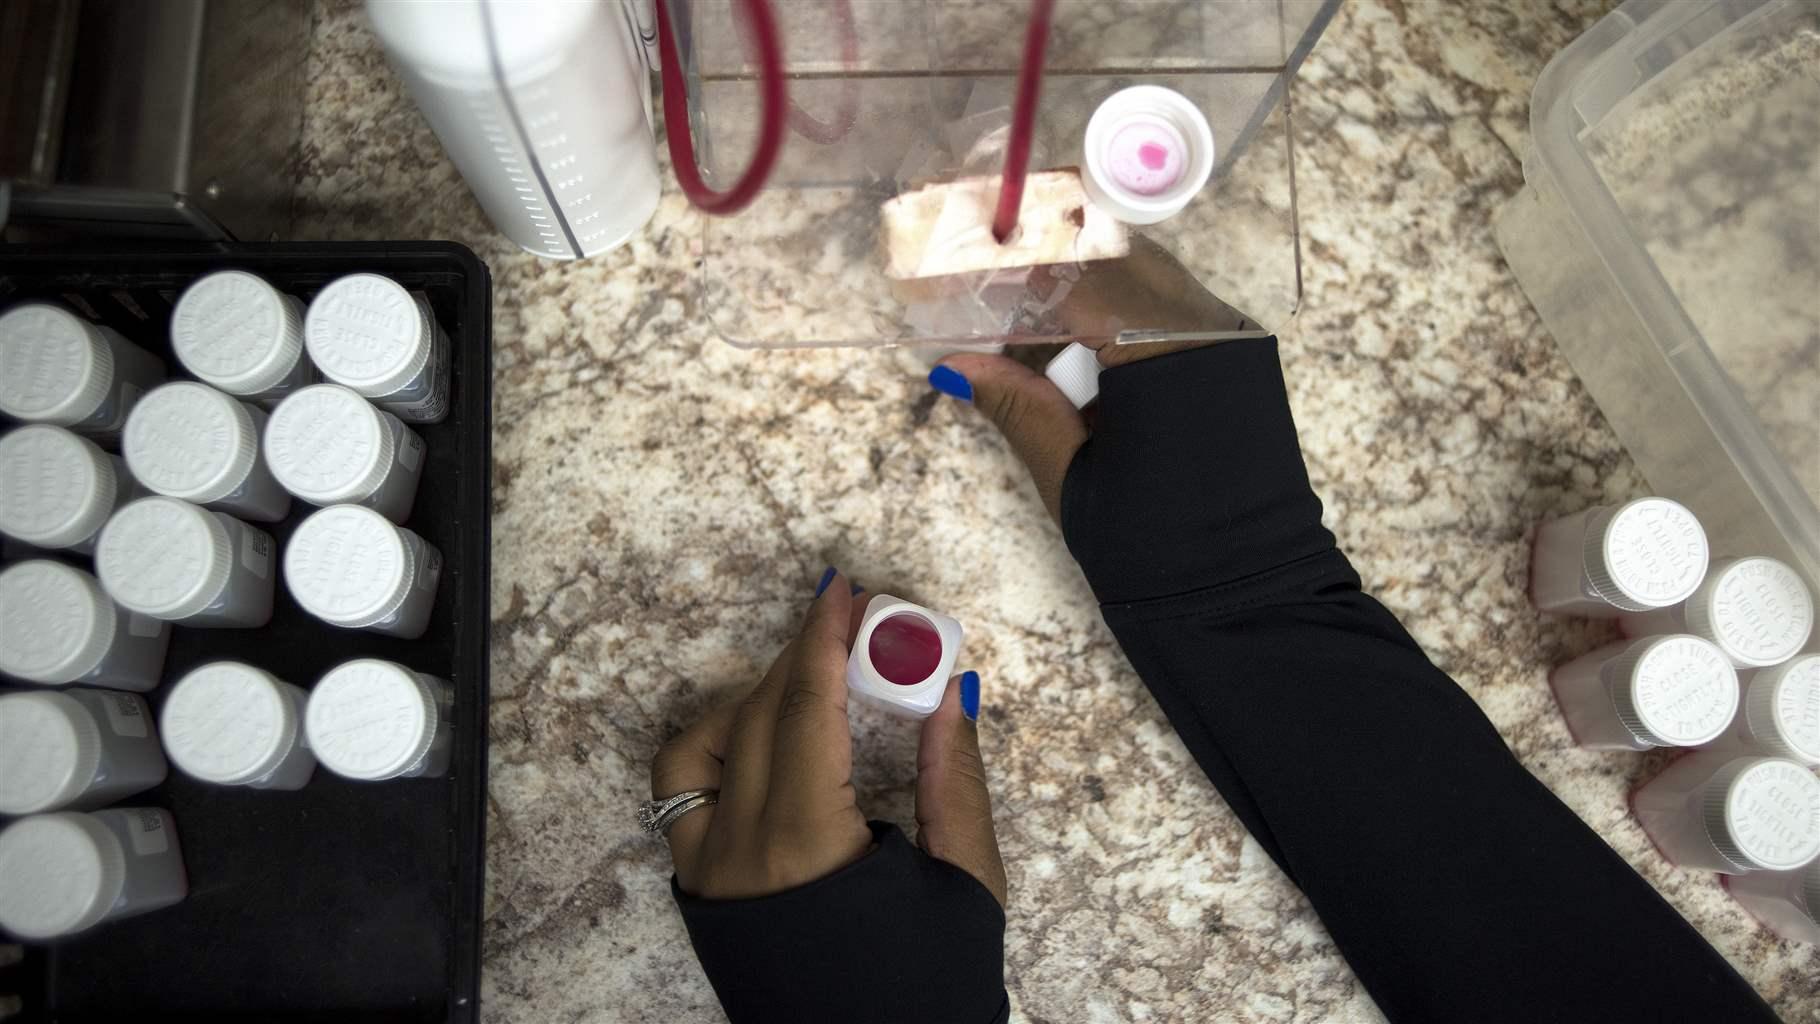 A nurse fills bottles with small amounts of liquid methadone for take-home prescriptions at a clinic in the Community Health Center in Akron, Ohio, Dec. 18, 2017. 